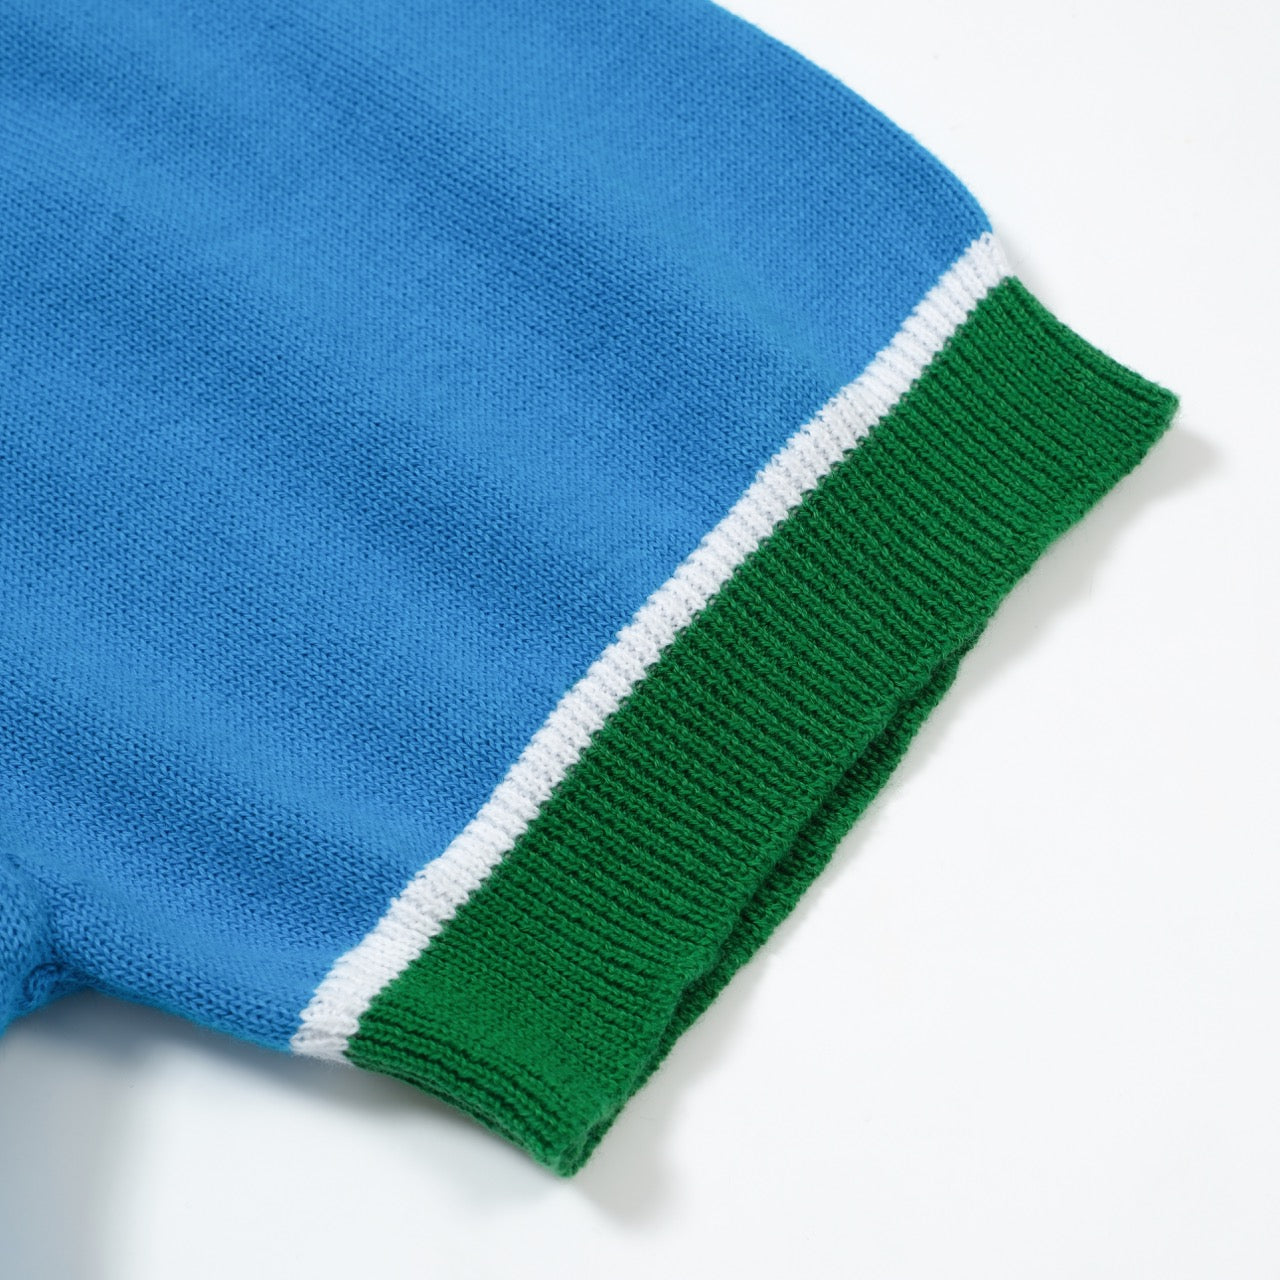 OXKNIT Men Vintage Clothing 1960s Mod Style V Neck Blue & Green  RetroPolo Knitted Wear